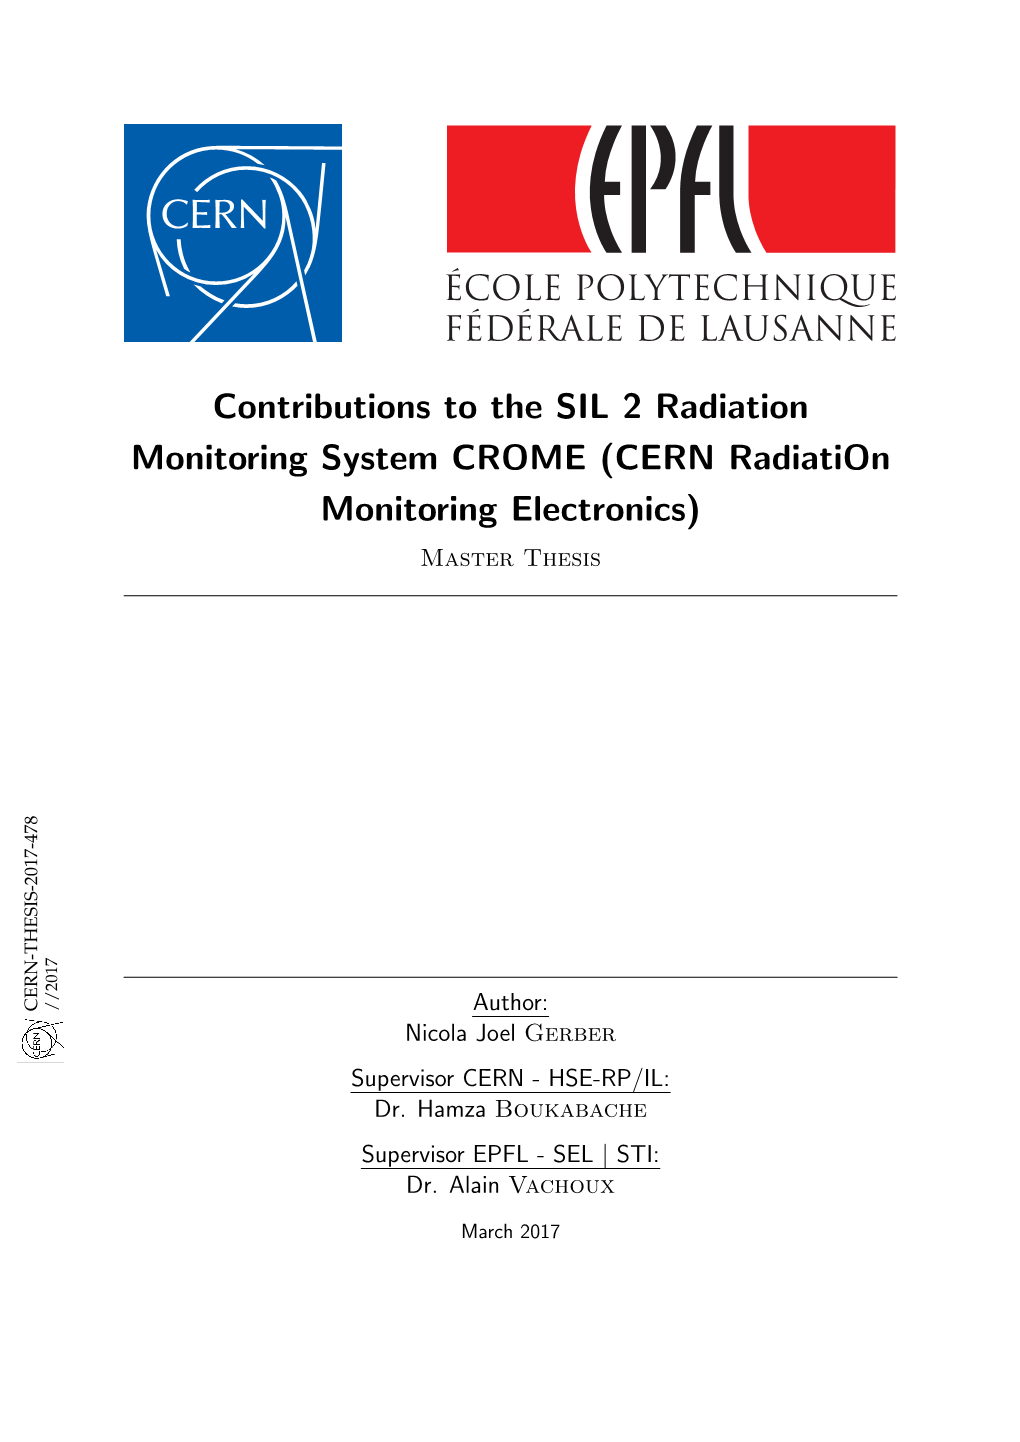 CERN Radiation Monitoring Electronics (CROME) Project in Order to Develop a Replacement